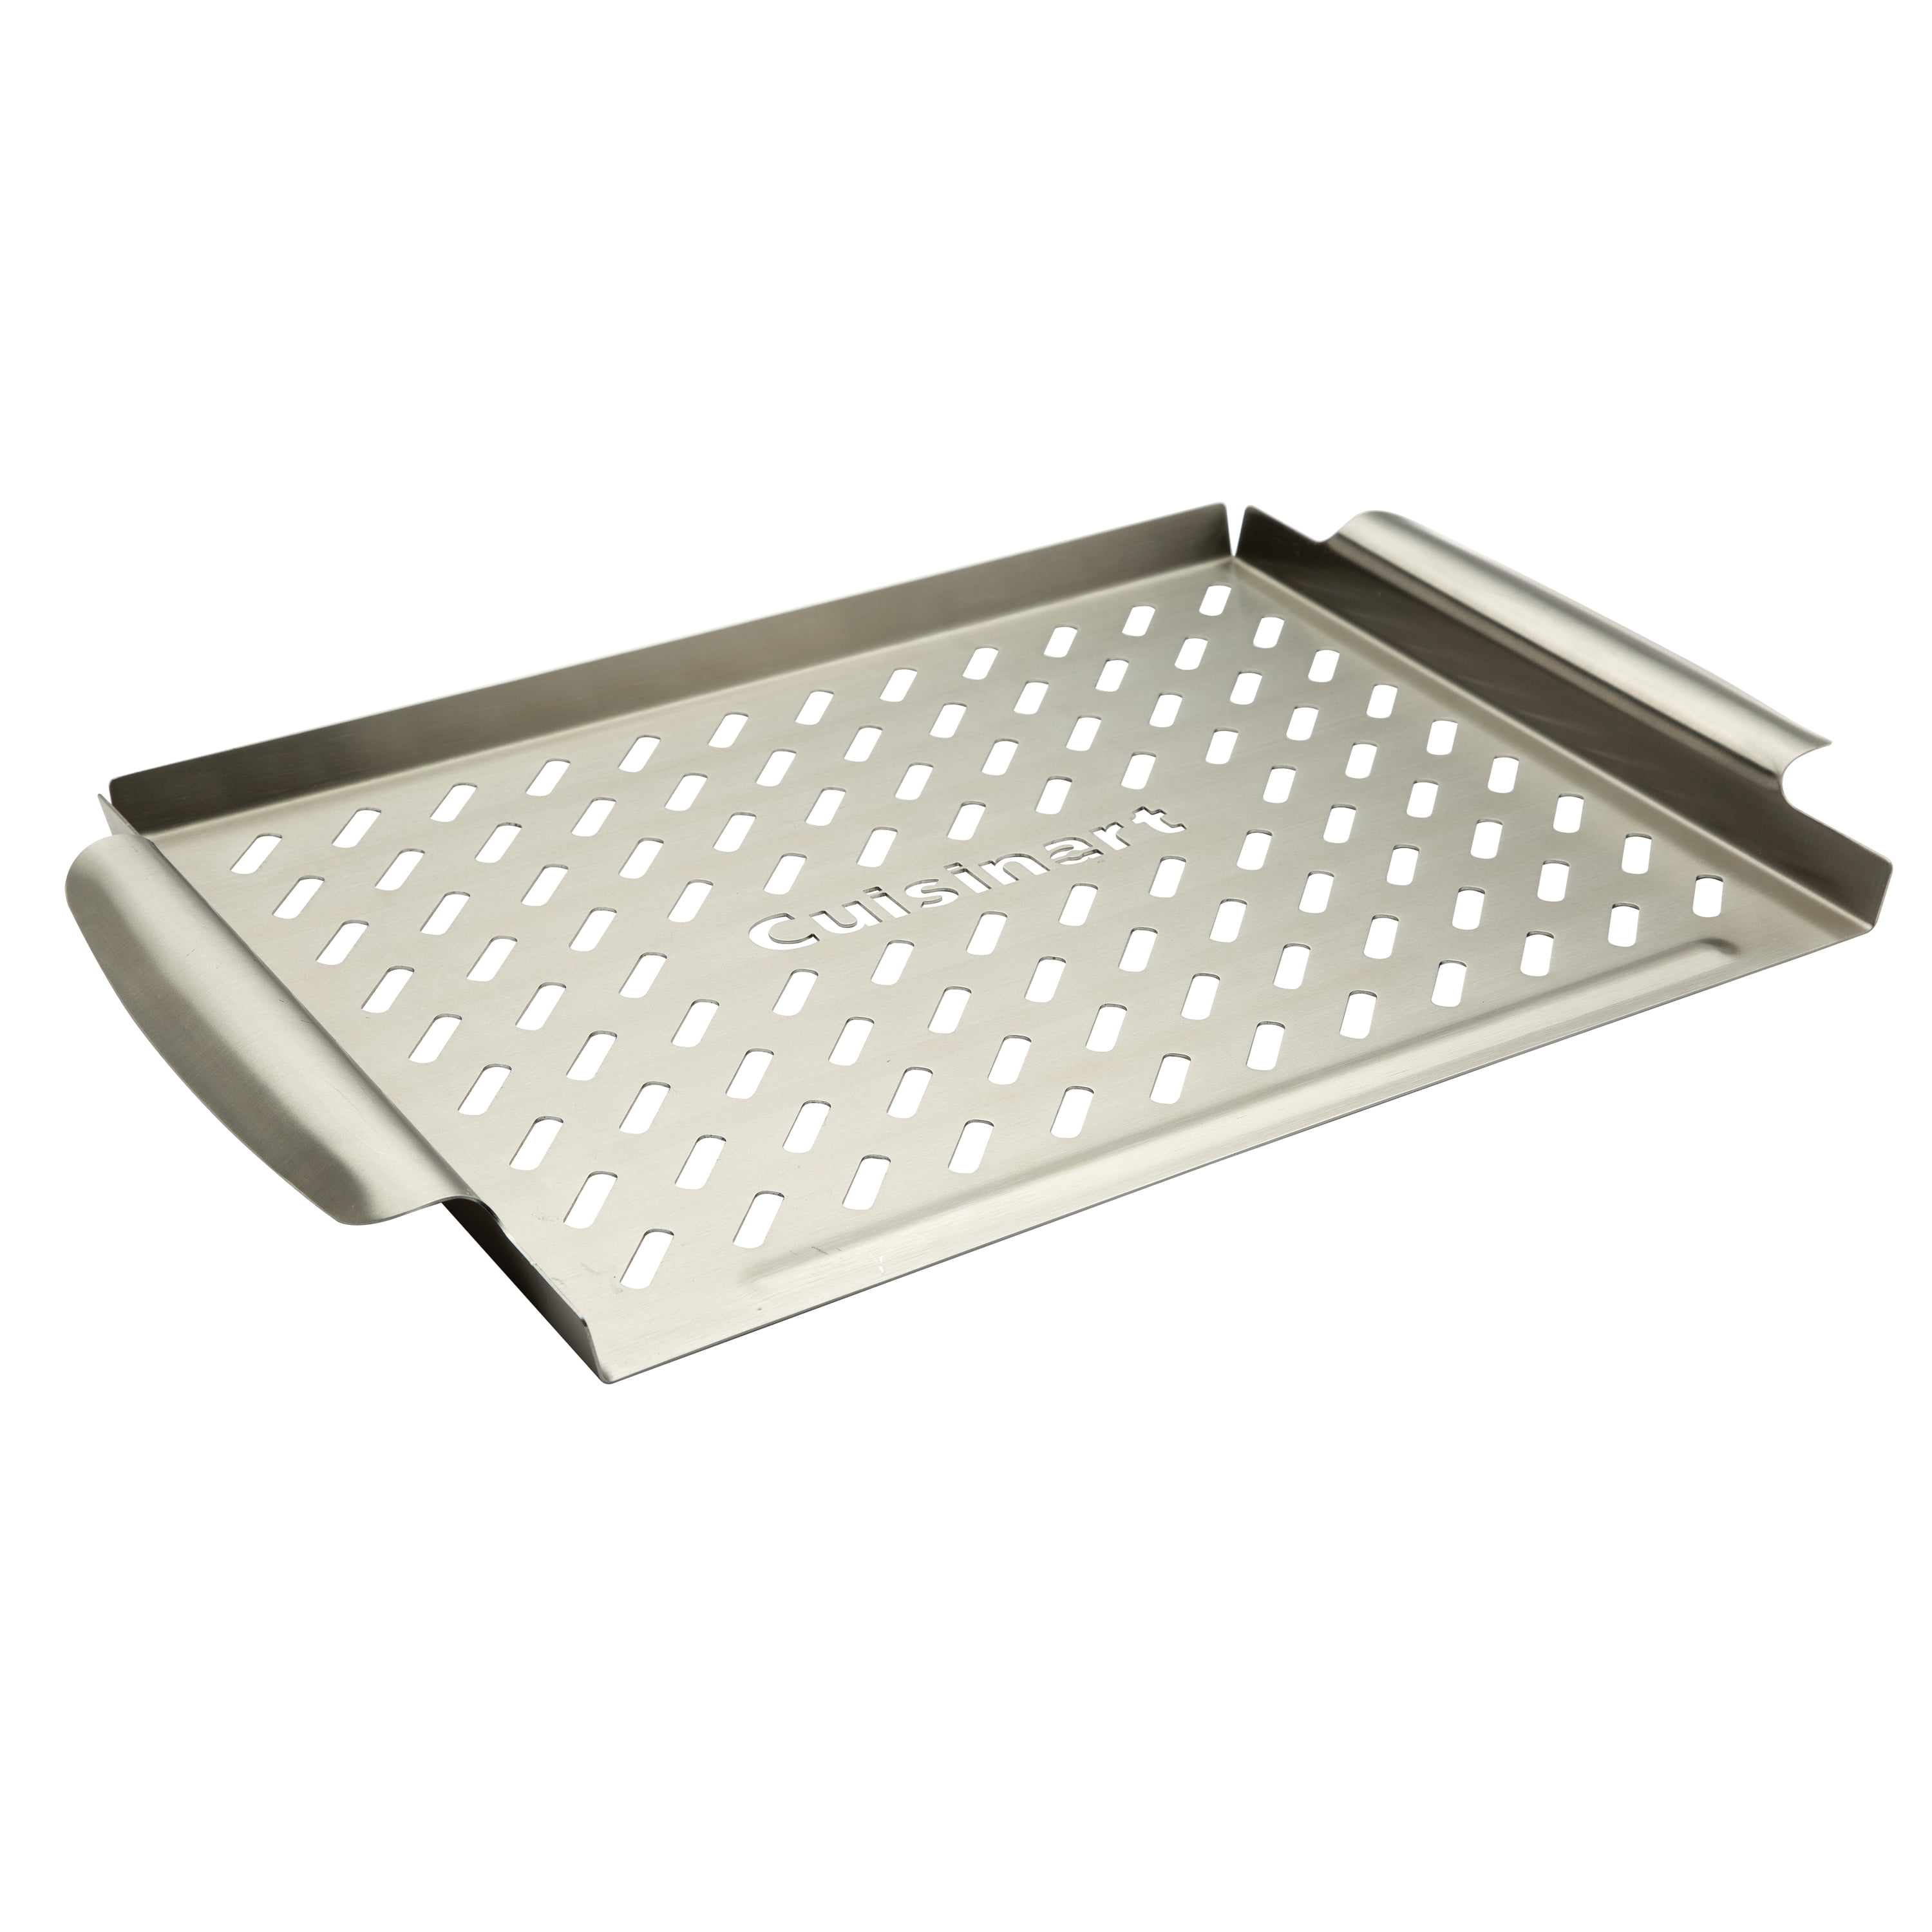 Cuisinart CGT-301 Stainless Steel Grill Topper, 12 x 16-Inch